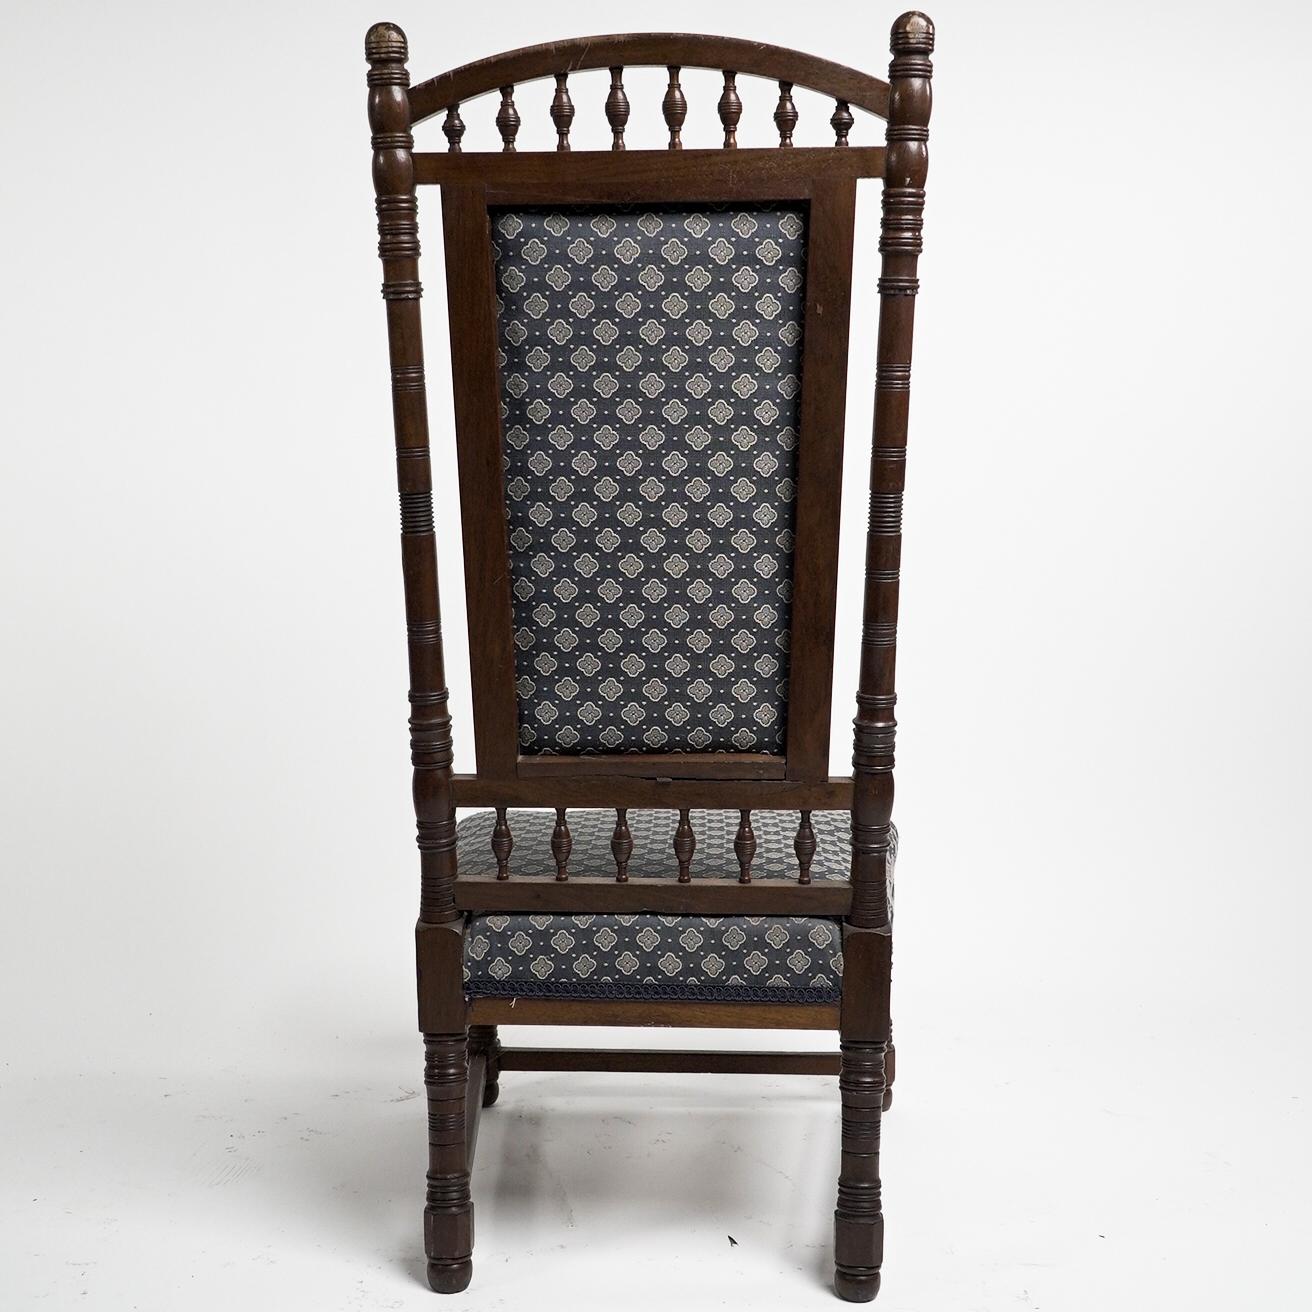 T E Collcutt for Collinson & Lock. An Aesthetic Movement walnut high back chair. For Sale 2